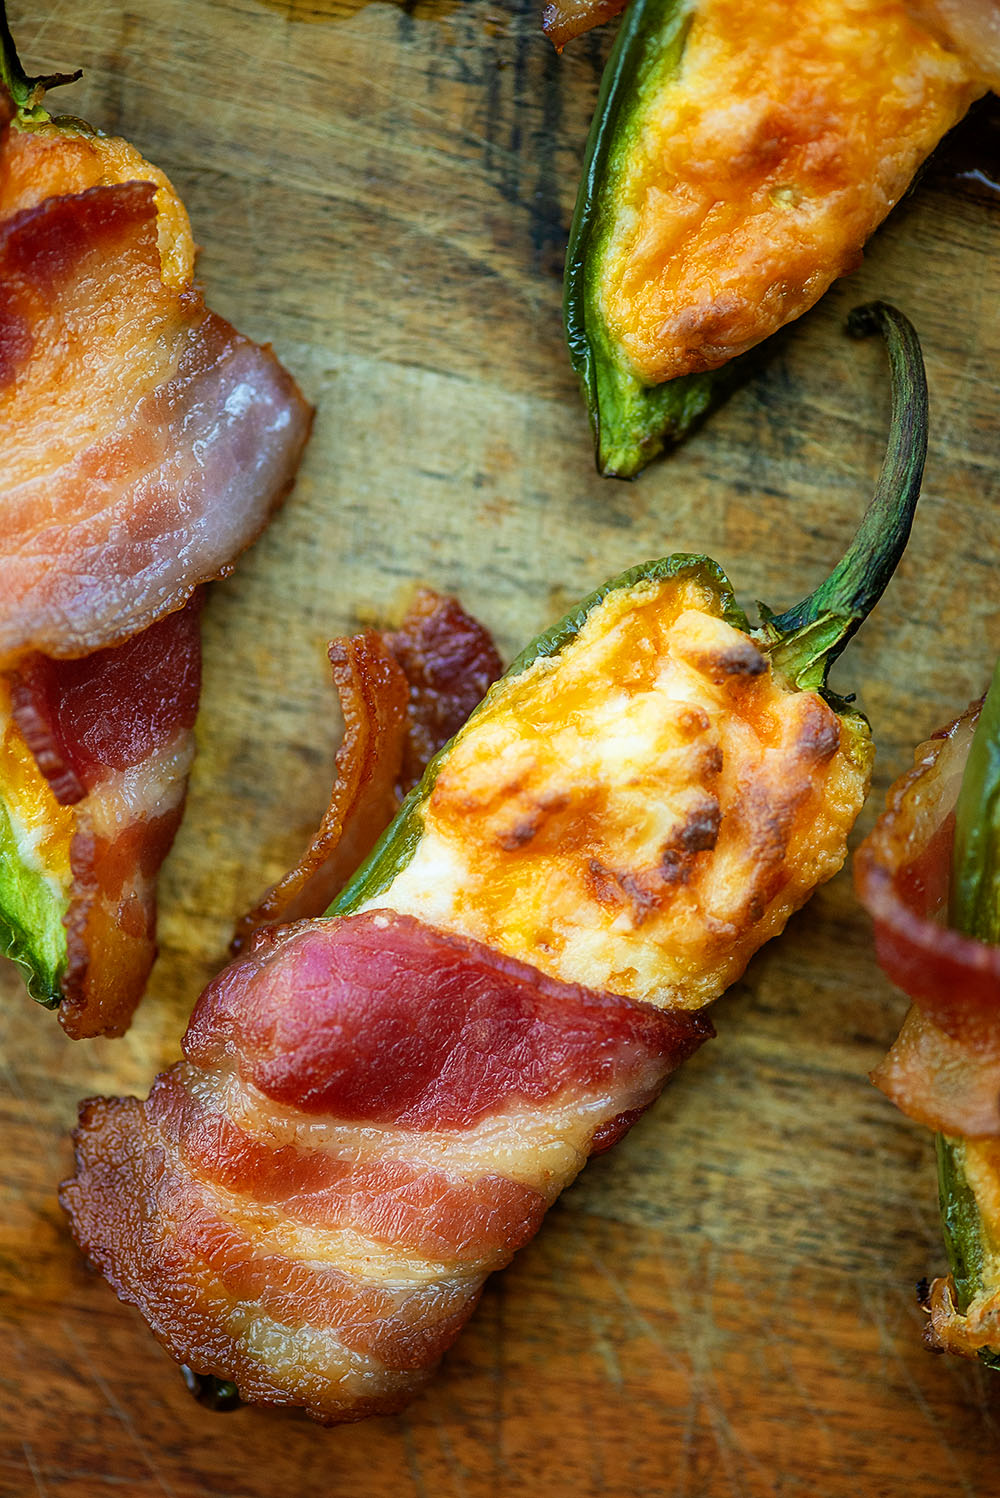 Bacon wrapped jalepenos on a wooden cutting board